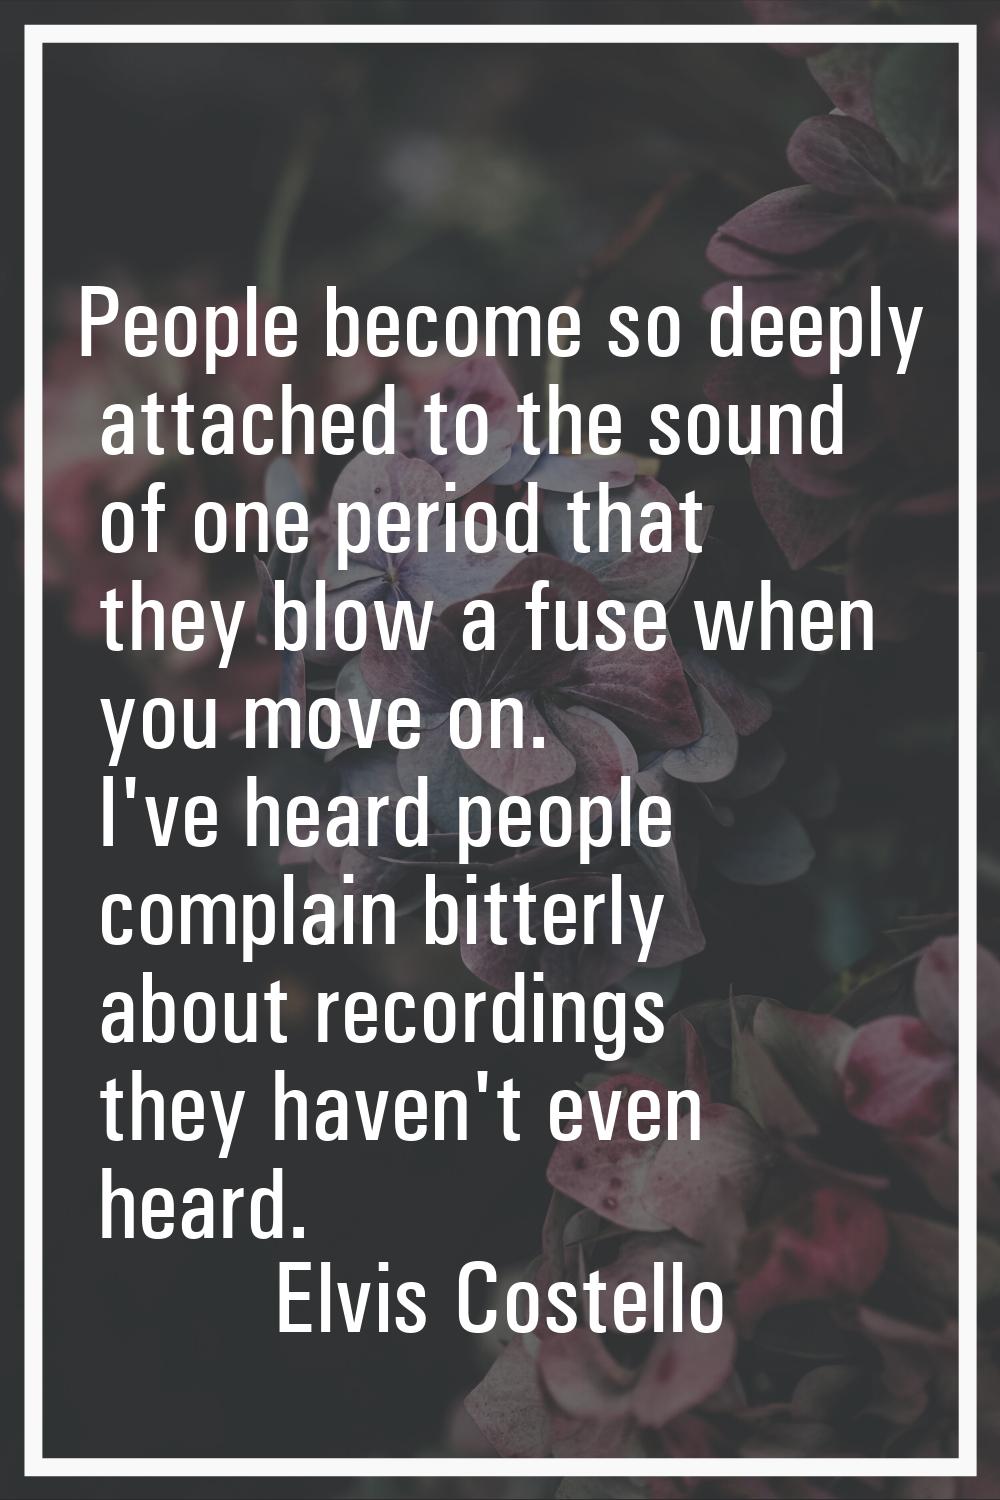 People become so deeply attached to the sound of one period that they blow a fuse when you move on.